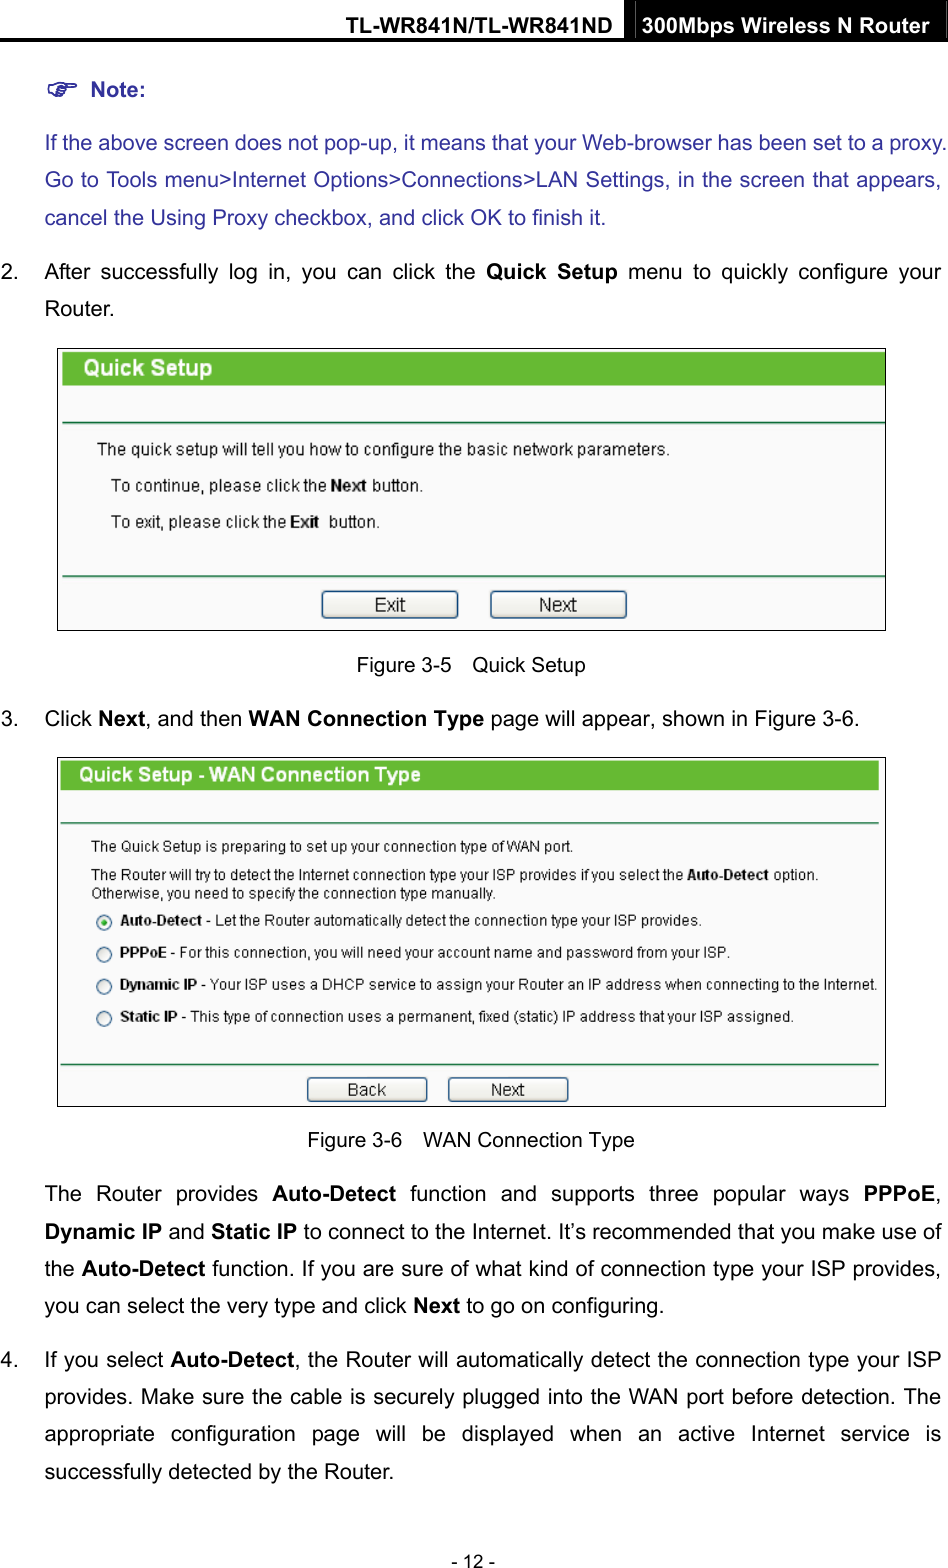 TL-WR841N/TL-WR841ND 300Mbps Wireless N Router - 12 - ) Note: If the above screen does not pop-up, it means that your Web-browser has been set to a proxy. Go to Tools menu&gt;Internet Options&gt;Connections&gt;LAN Settings, in the screen that appears, cancel the Using Proxy checkbox, and click OK to finish it. 2.  After successfully log in, you can click the Quick Setup menu to quickly configure your Router.   Figure 3-5    Quick Setup 3. Click Next, and then WAN Connection Type page will appear, shown in Figure 3-6.  Figure 3-6    WAN Connection Type The Router provides Auto-Detect function and supports three popular ways PPPoE, Dynamic IP and Static IP to connect to the Internet. It’s recommended that you make use of the Auto-Detect function. If you are sure of what kind of connection type your ISP provides, you can select the very type and click Next to go on configuring. 4.  If you select Auto-Detect, the Router will automatically detect the connection type your ISP provides. Make sure the cable is securely plugged into the WAN port before detection. The appropriate configuration page will be displayed when an active Internet service is successfully detected by the Router. 